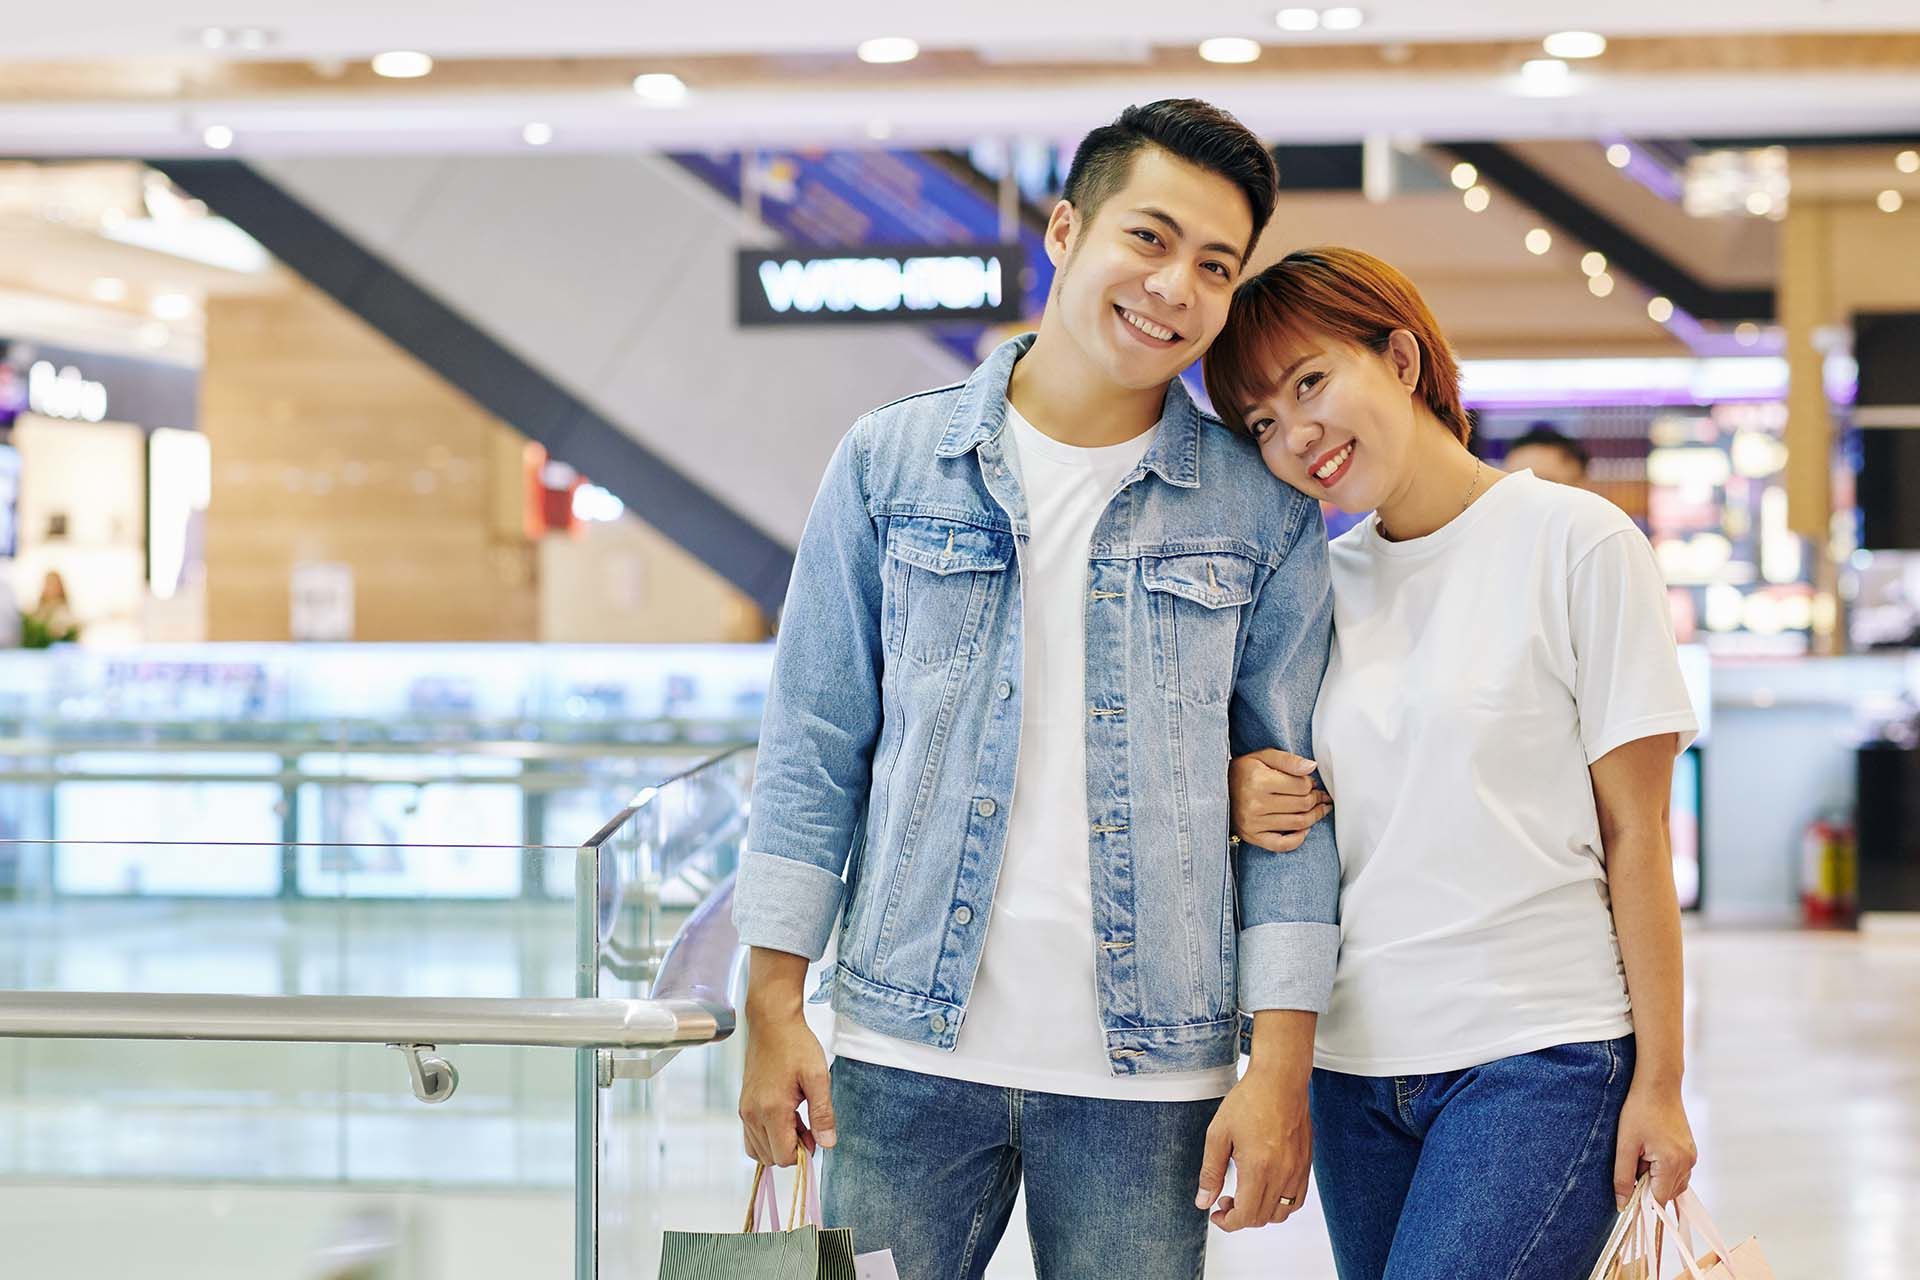 Happy couple standing together in a shopping mall